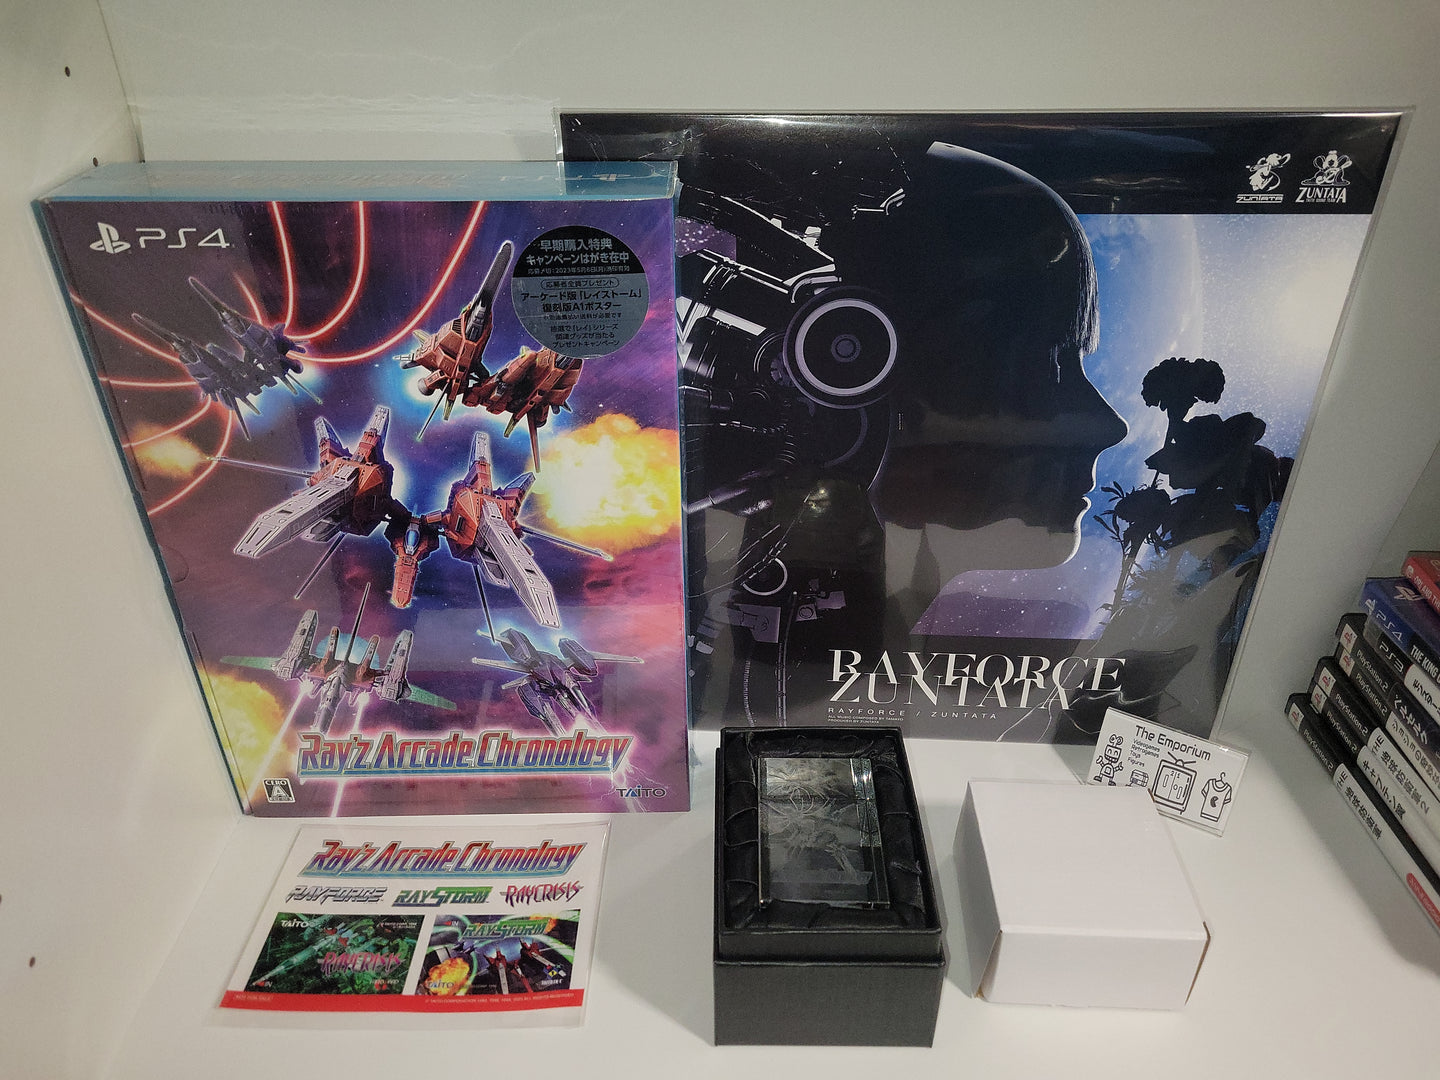 Ray’z Arcade Chronology Limited Edition Deluxe Limited Edition - Sony PS4 Playstation 4